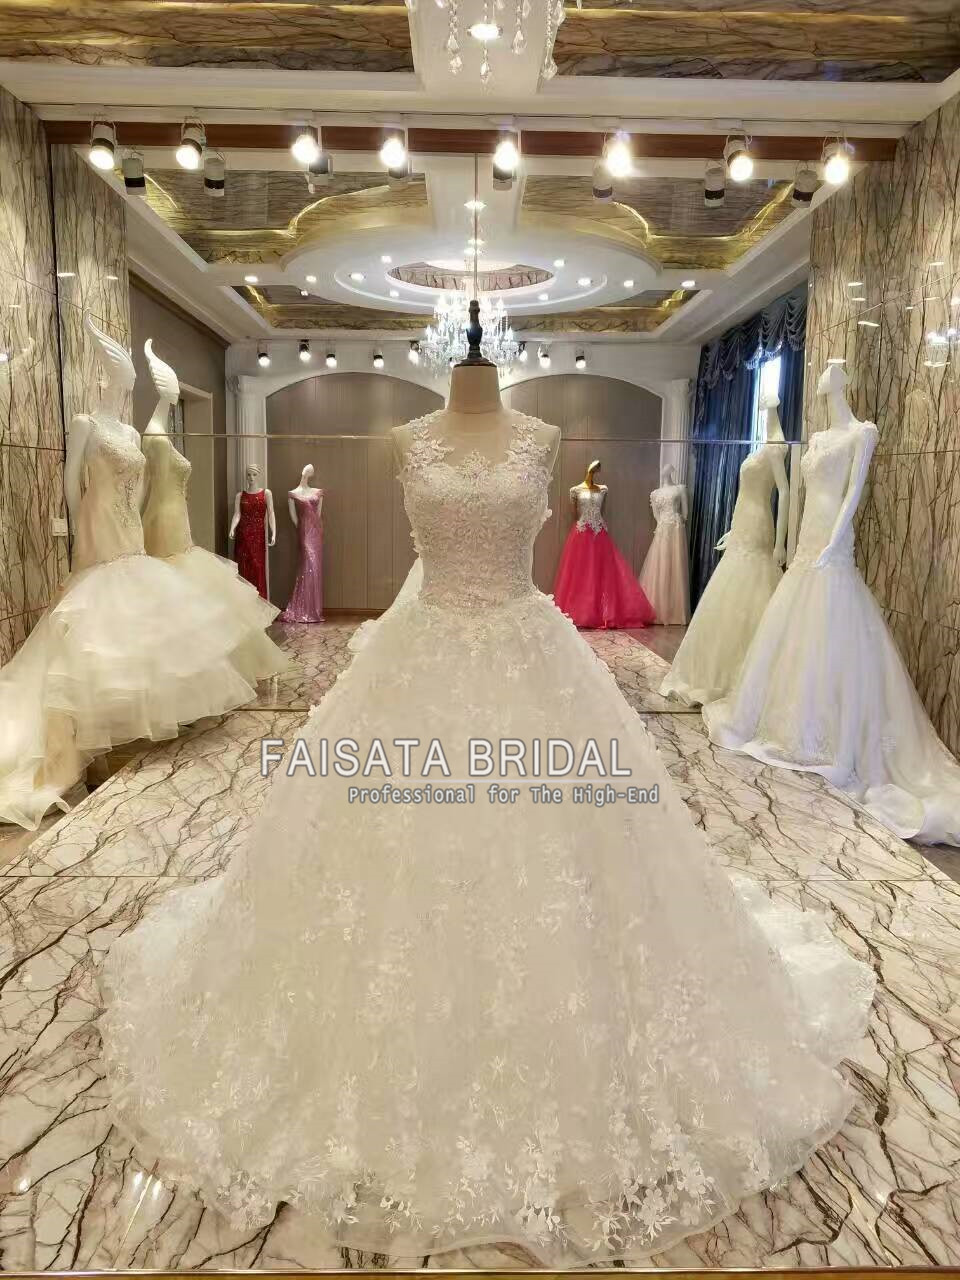 Luxury Shiny Crystal Beading Lace Wedding Dresses 2017 Vintage Ball Gown Vestido De Noiva 2016 Scoop Bridal Gowns High Quality Real Photos